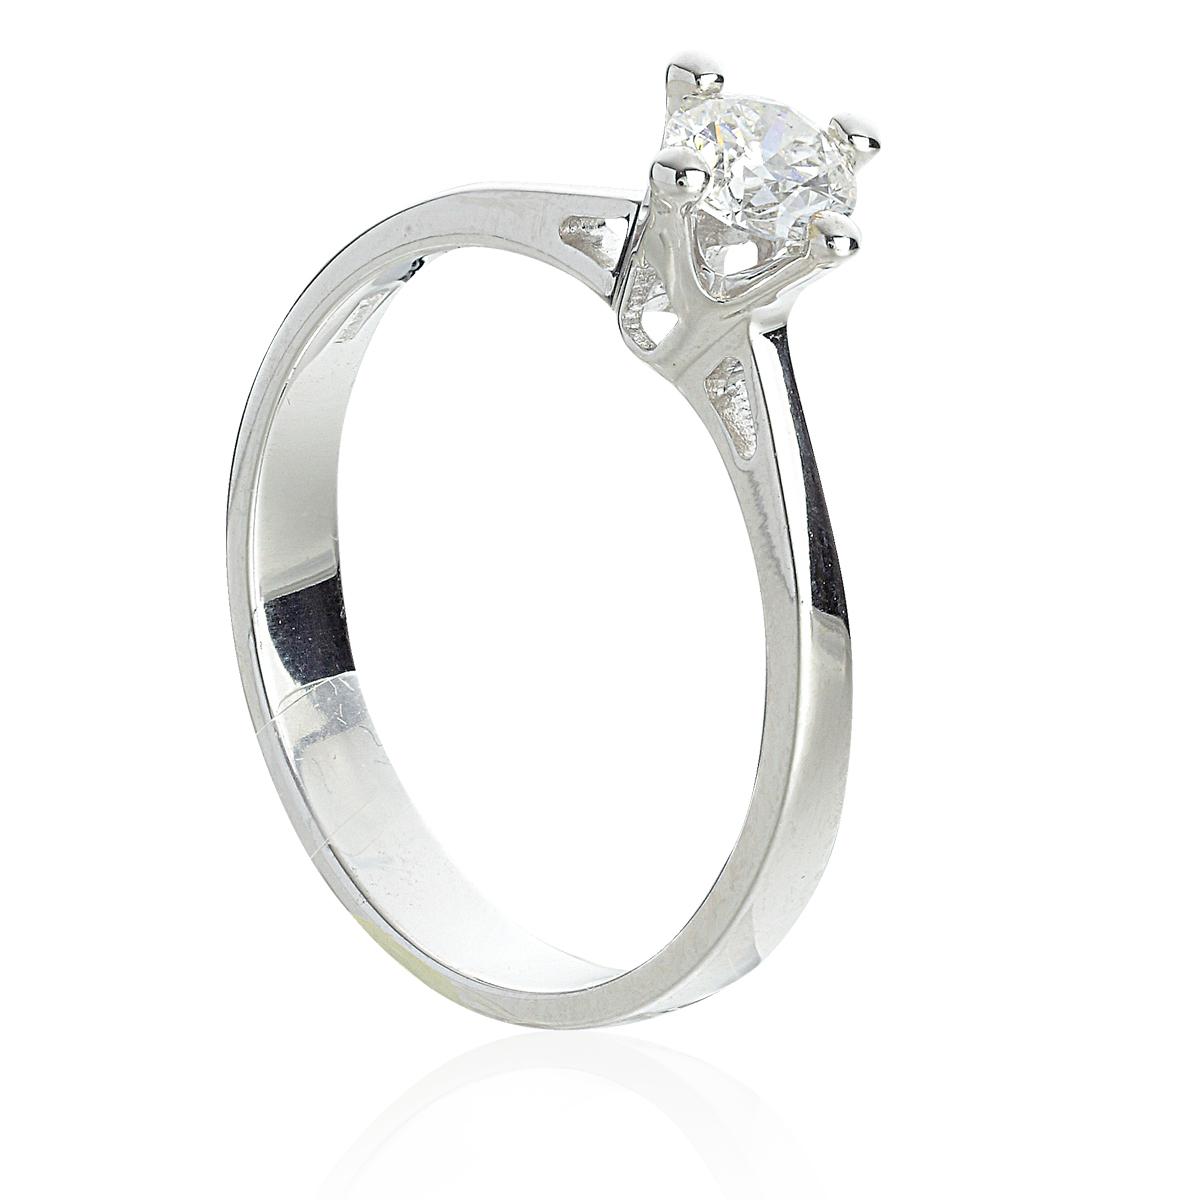 Solitaire Ring with Diamond